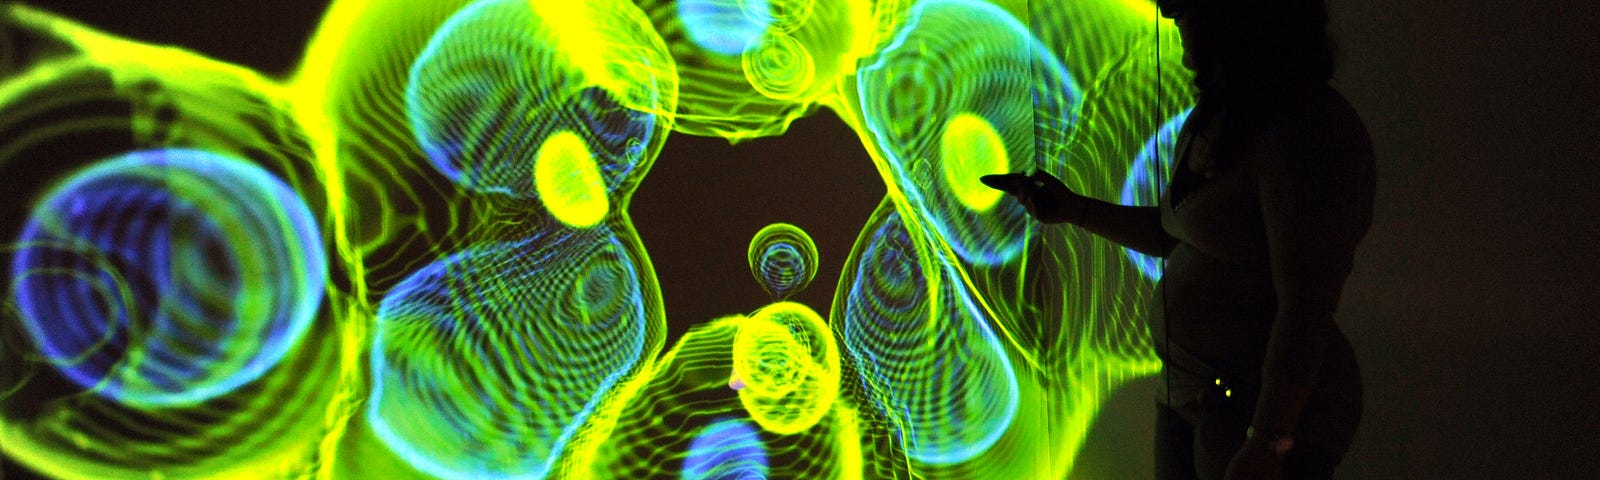 The image shows the silhouette of a person in front of a yellow, green and blue “jellyfish” representation of data.